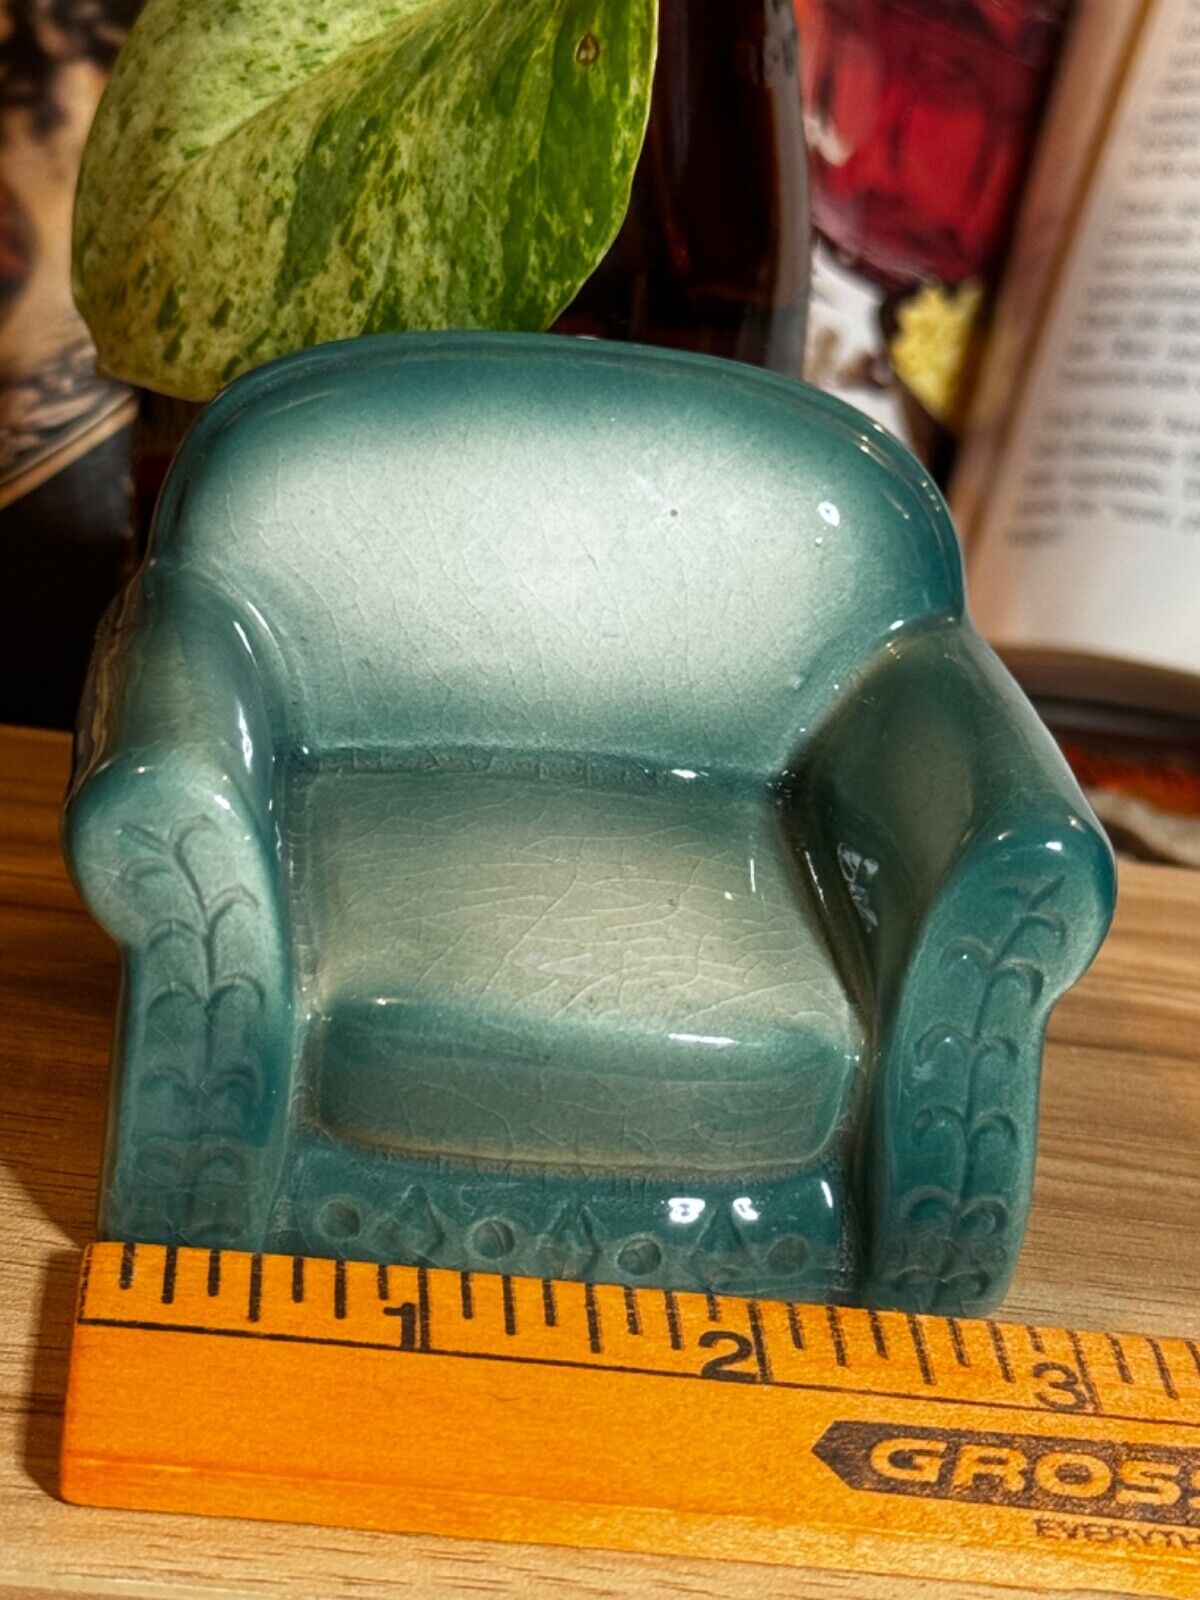 Vintage Green Couch Salt Shaker- replacement piece